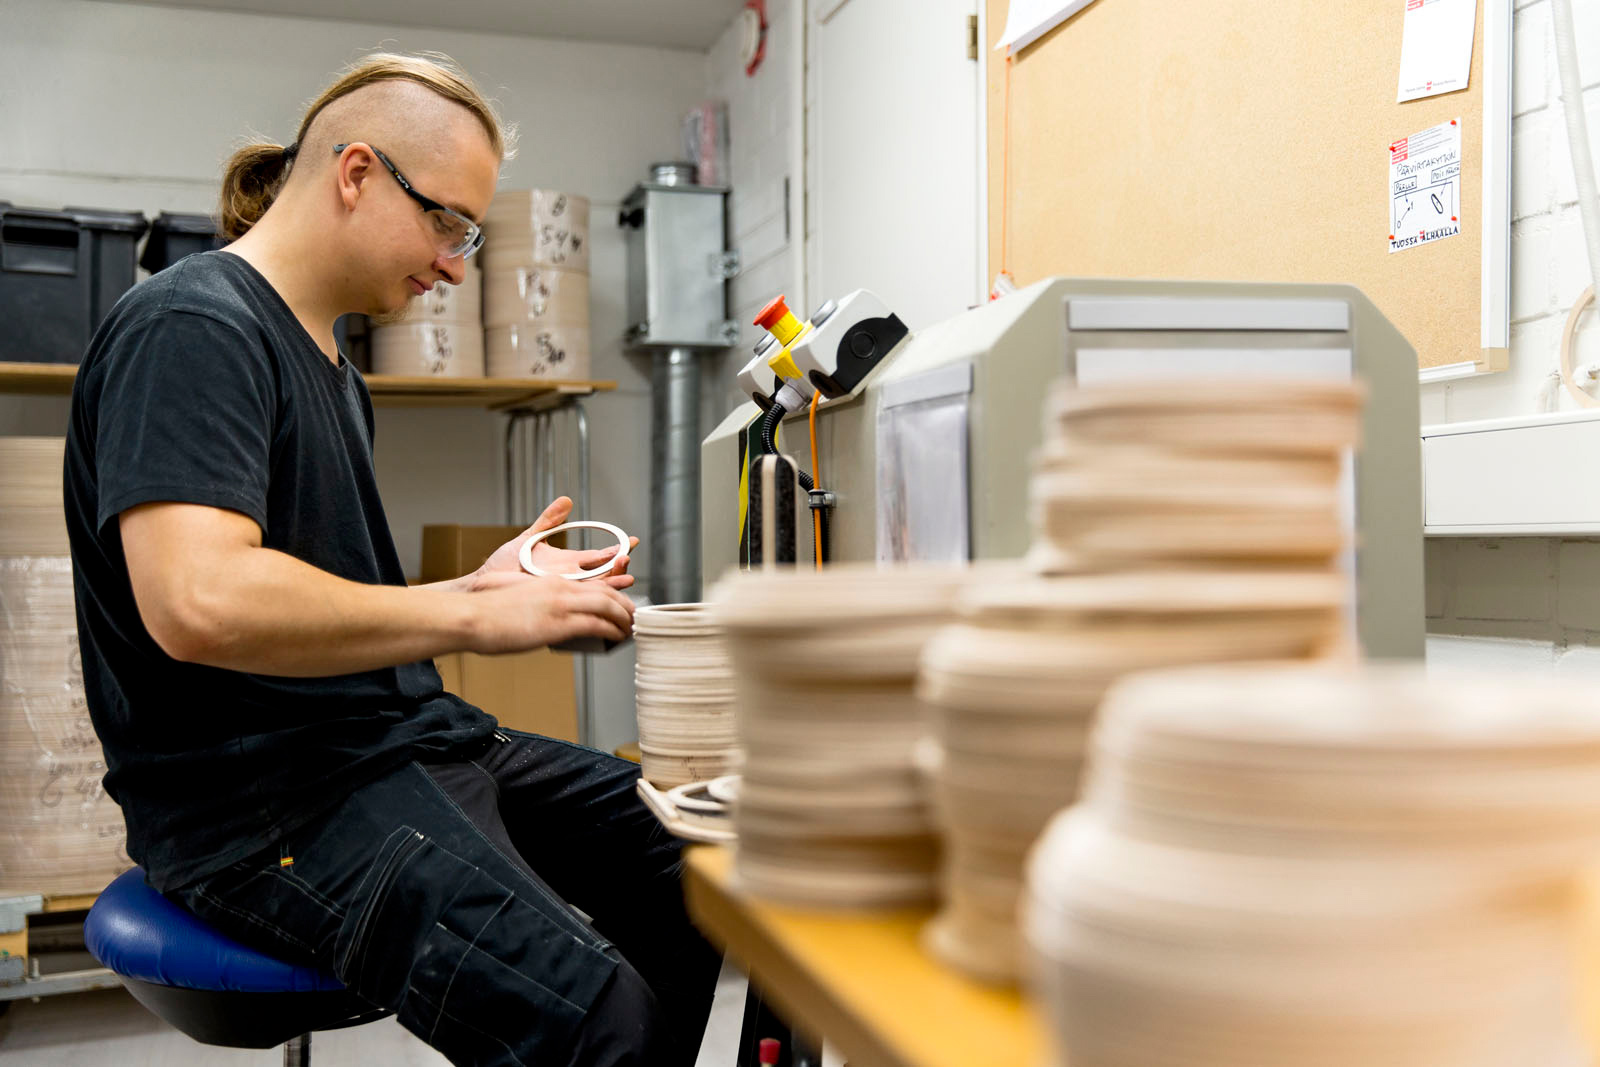 A male employee sitting on a chair on the left, sanding the wooden rings, which are piled up on a table on the right.